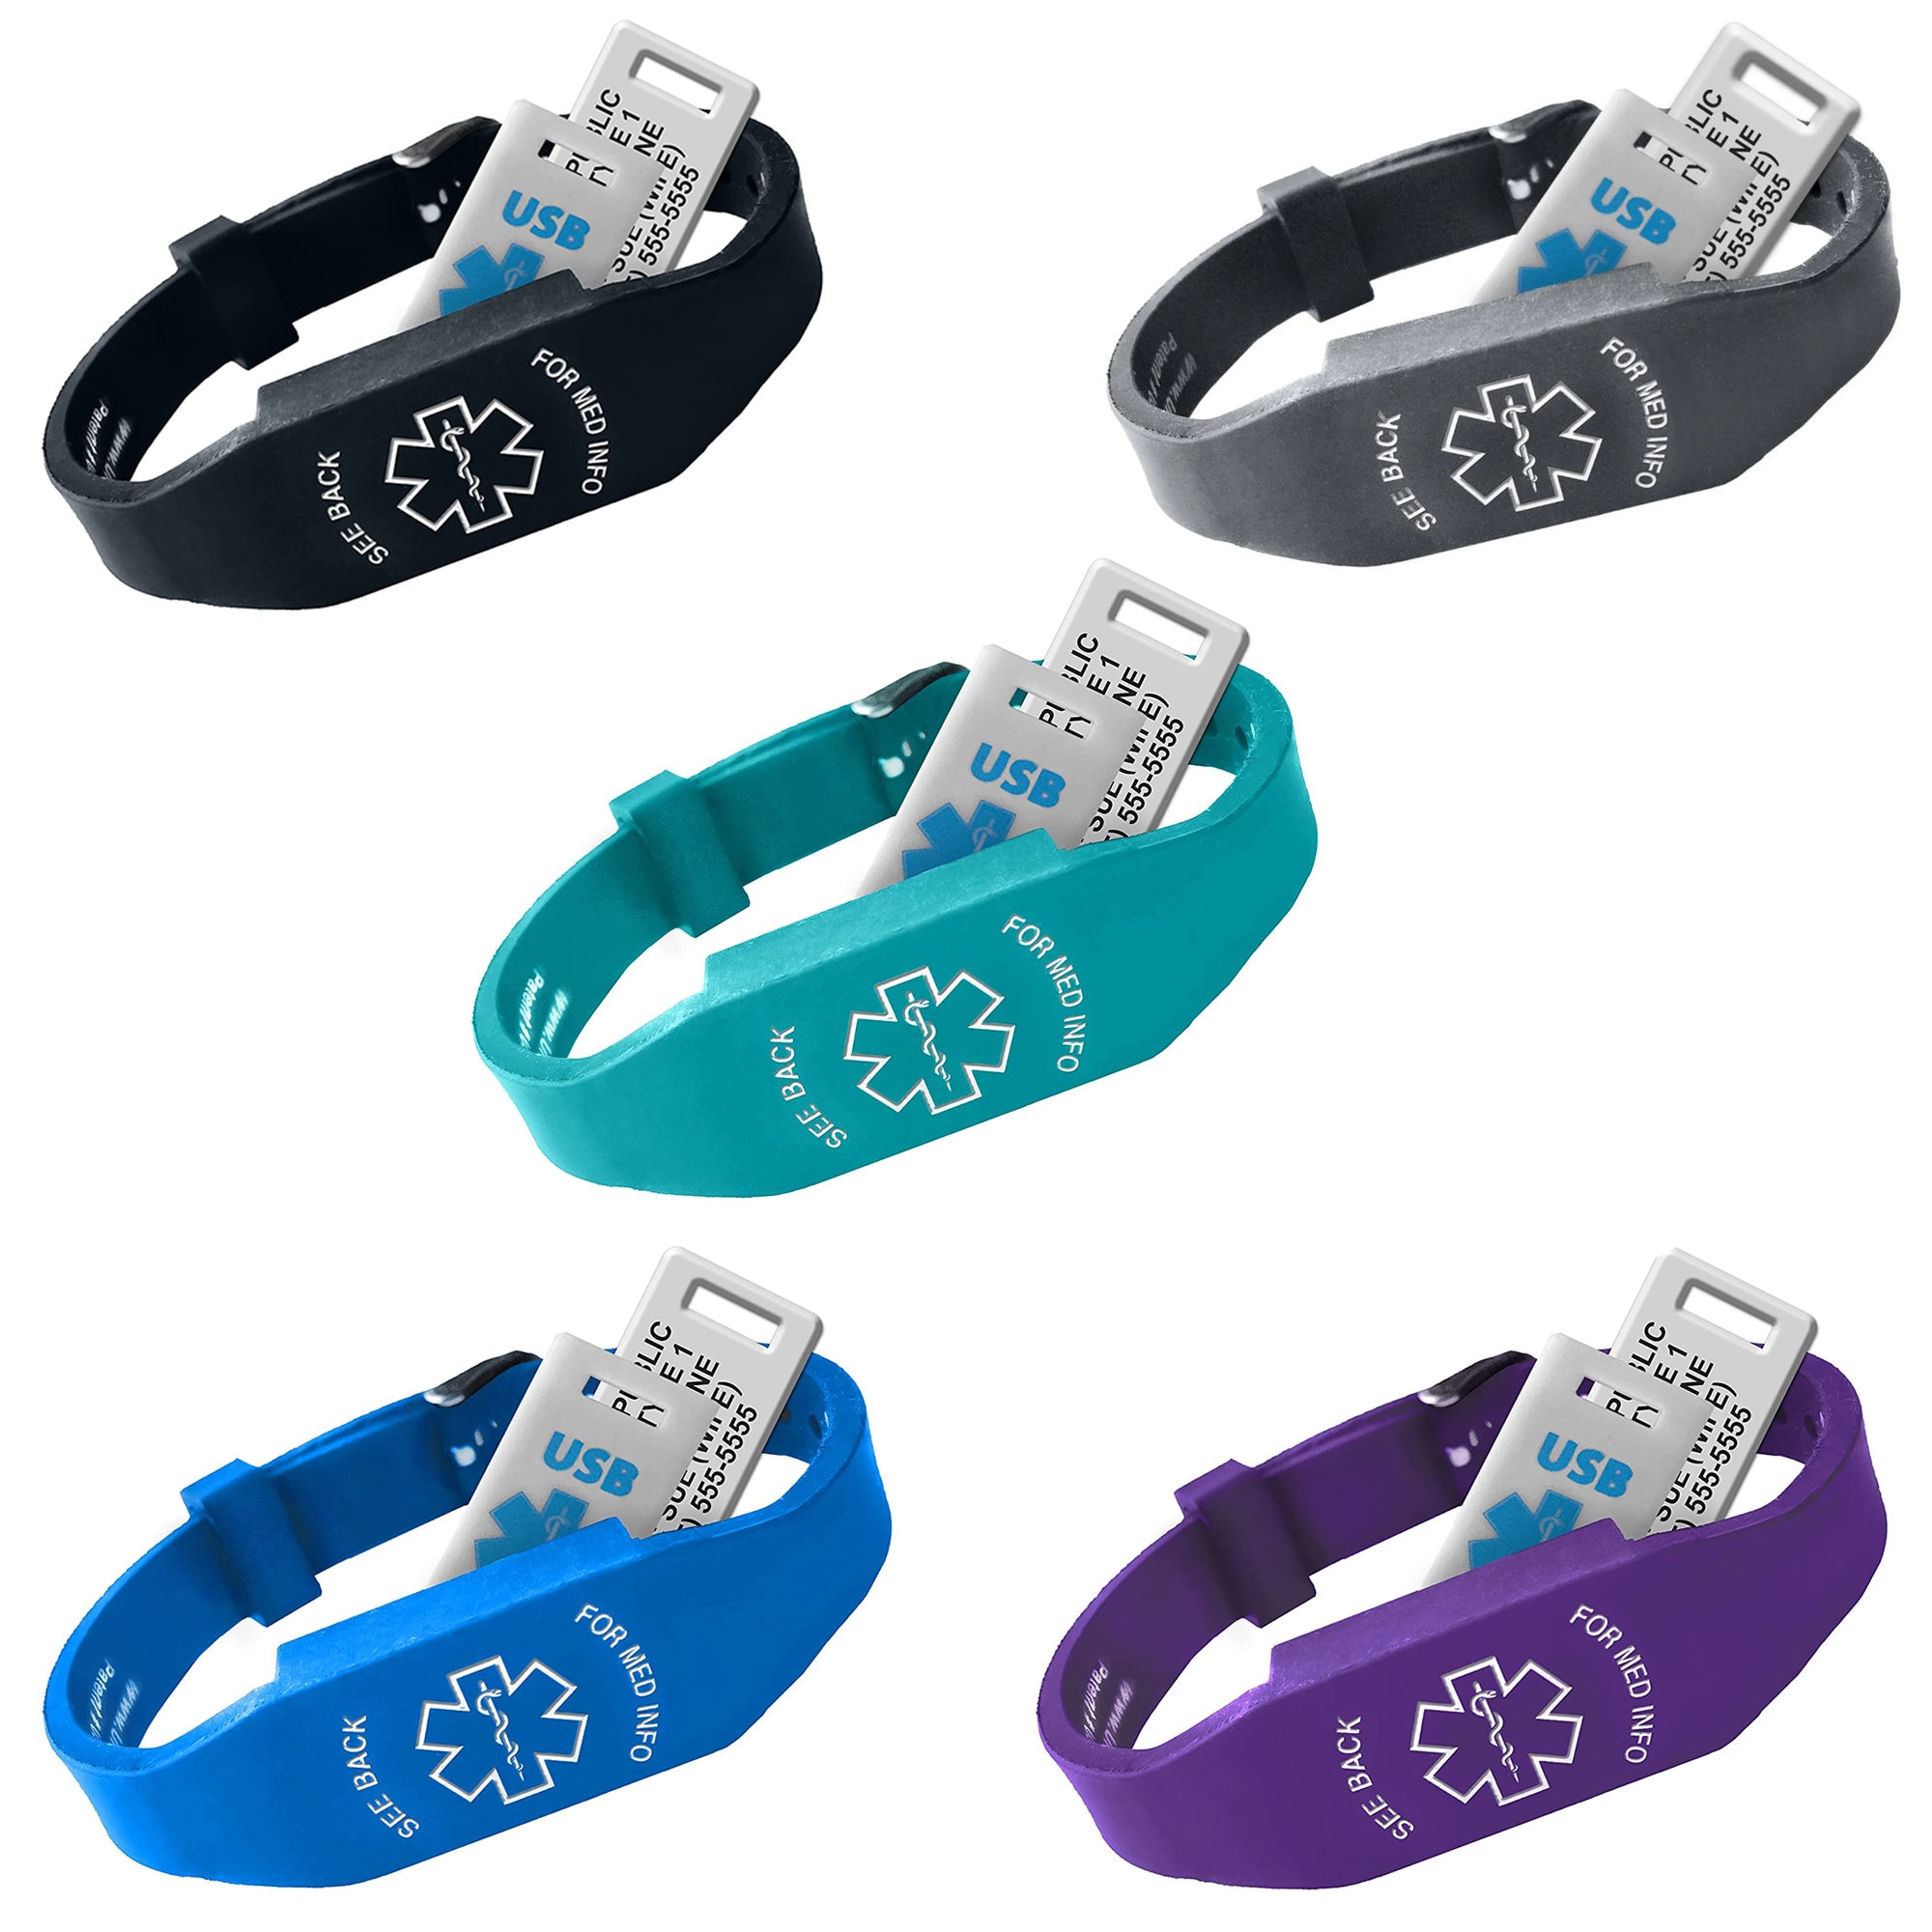 USBWD 2.0 Wristband Drive WD - All-in-One, the write choice